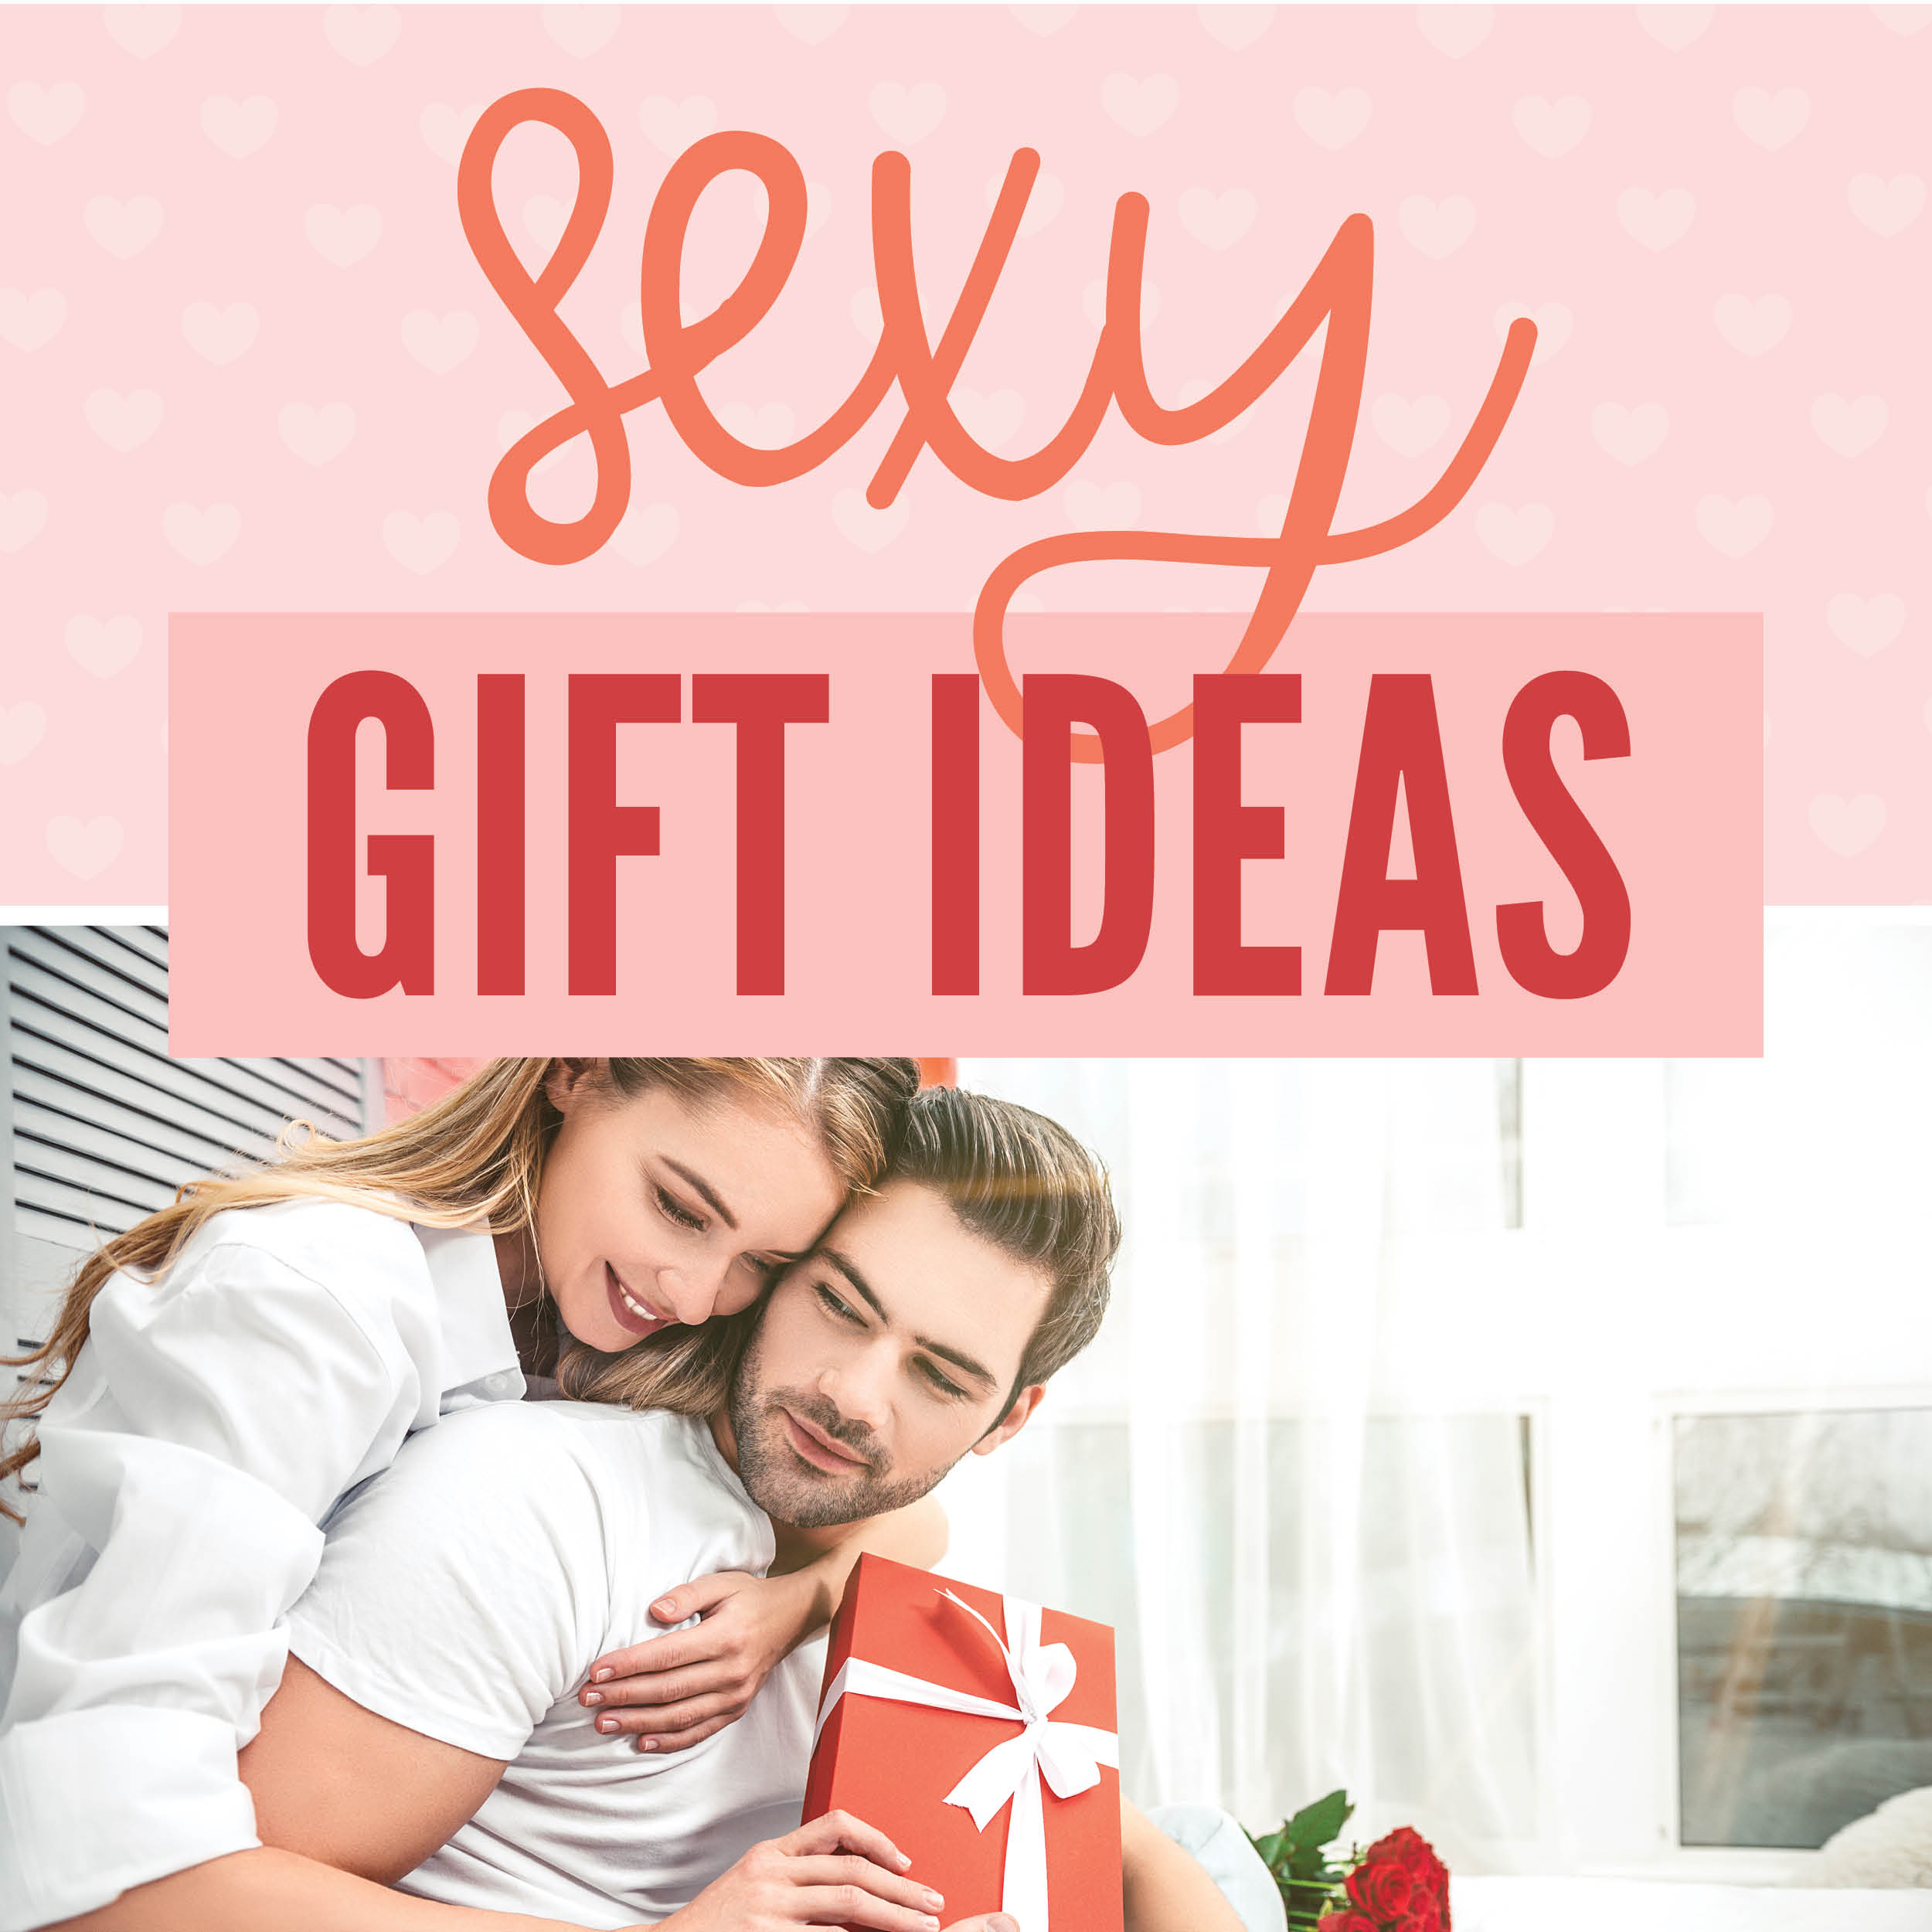 erotic gifts for your wife porn gallerie